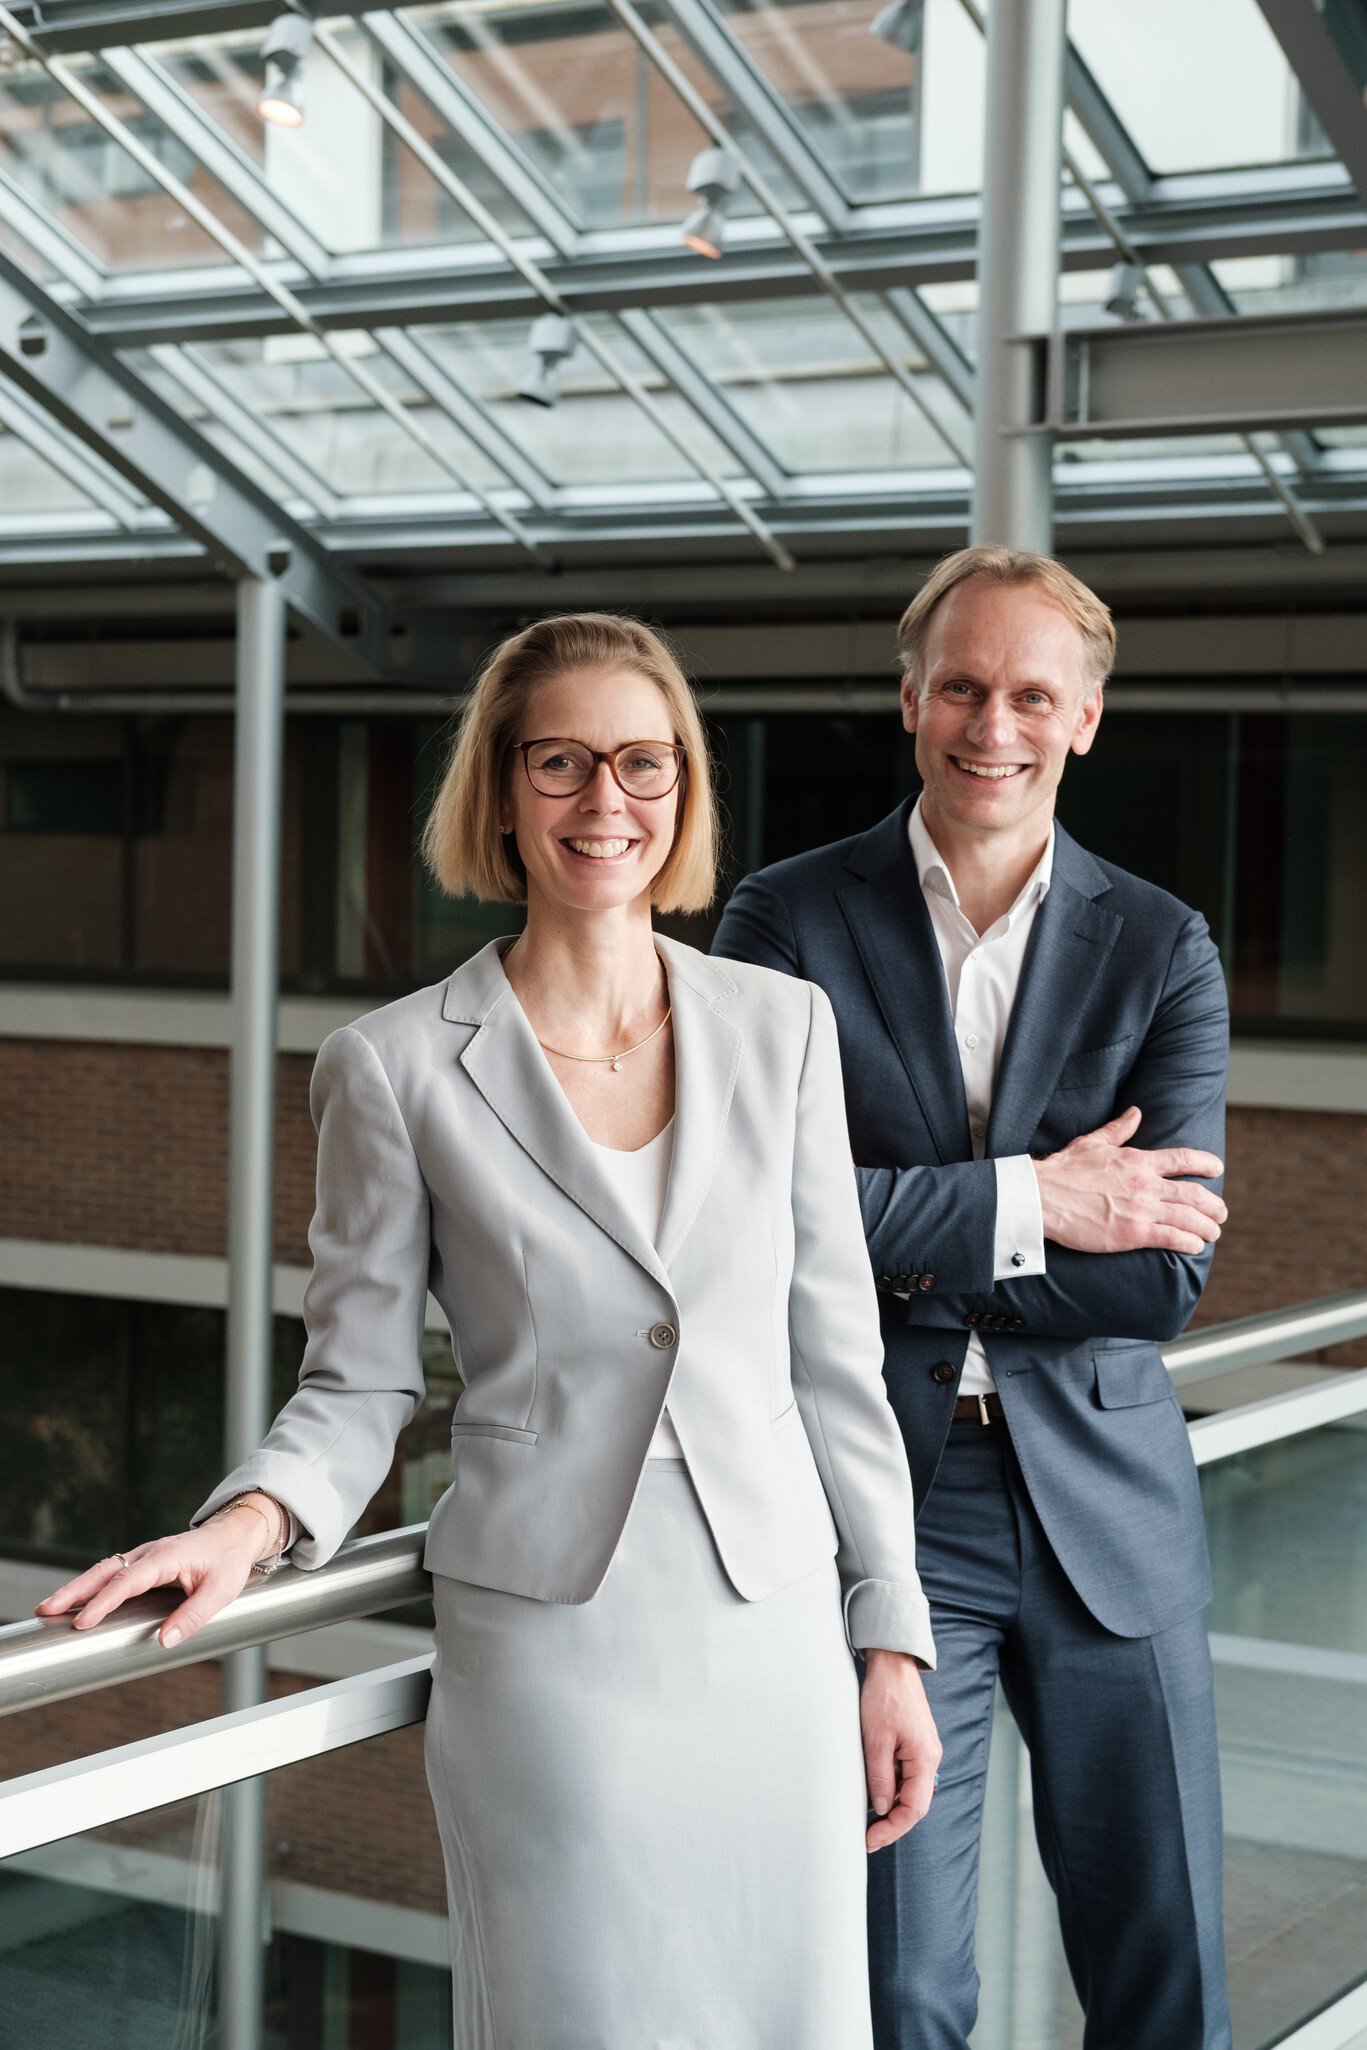 Mark Heine (Chief Executive Officer) and Barbara Geelen (Chief Financial Officer) comprise Fugro's board of management